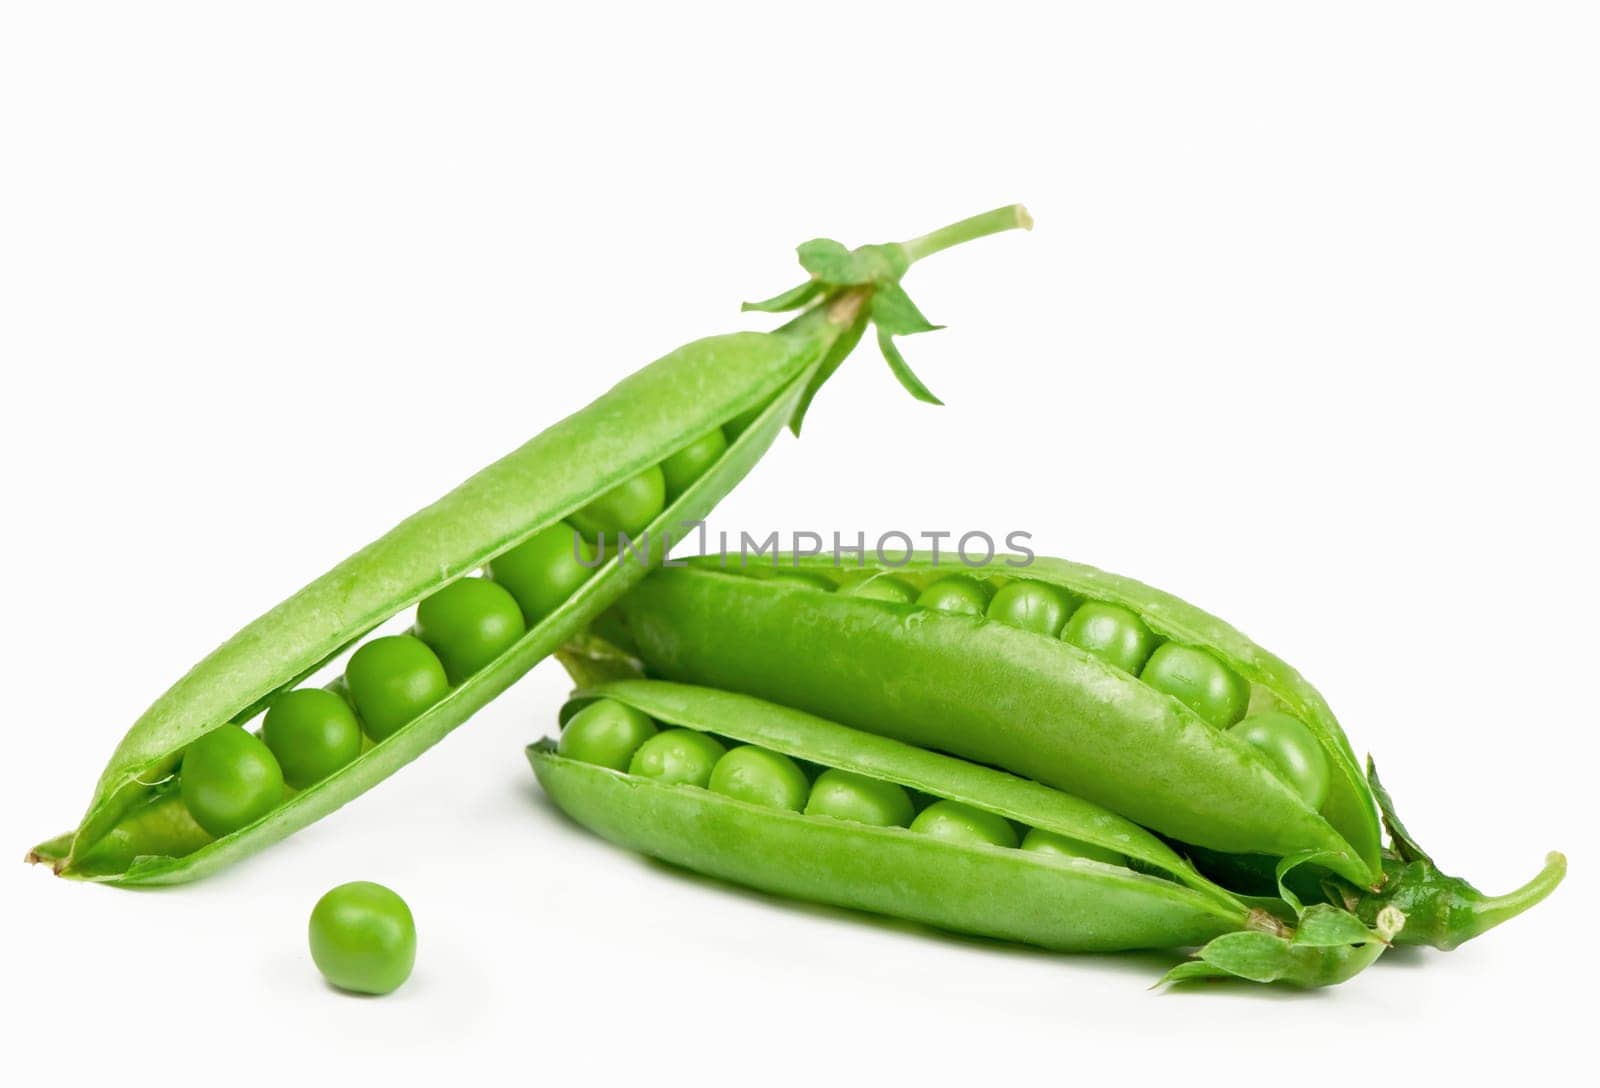 Raw green peas in pods isolated on the white background by aprilphoto